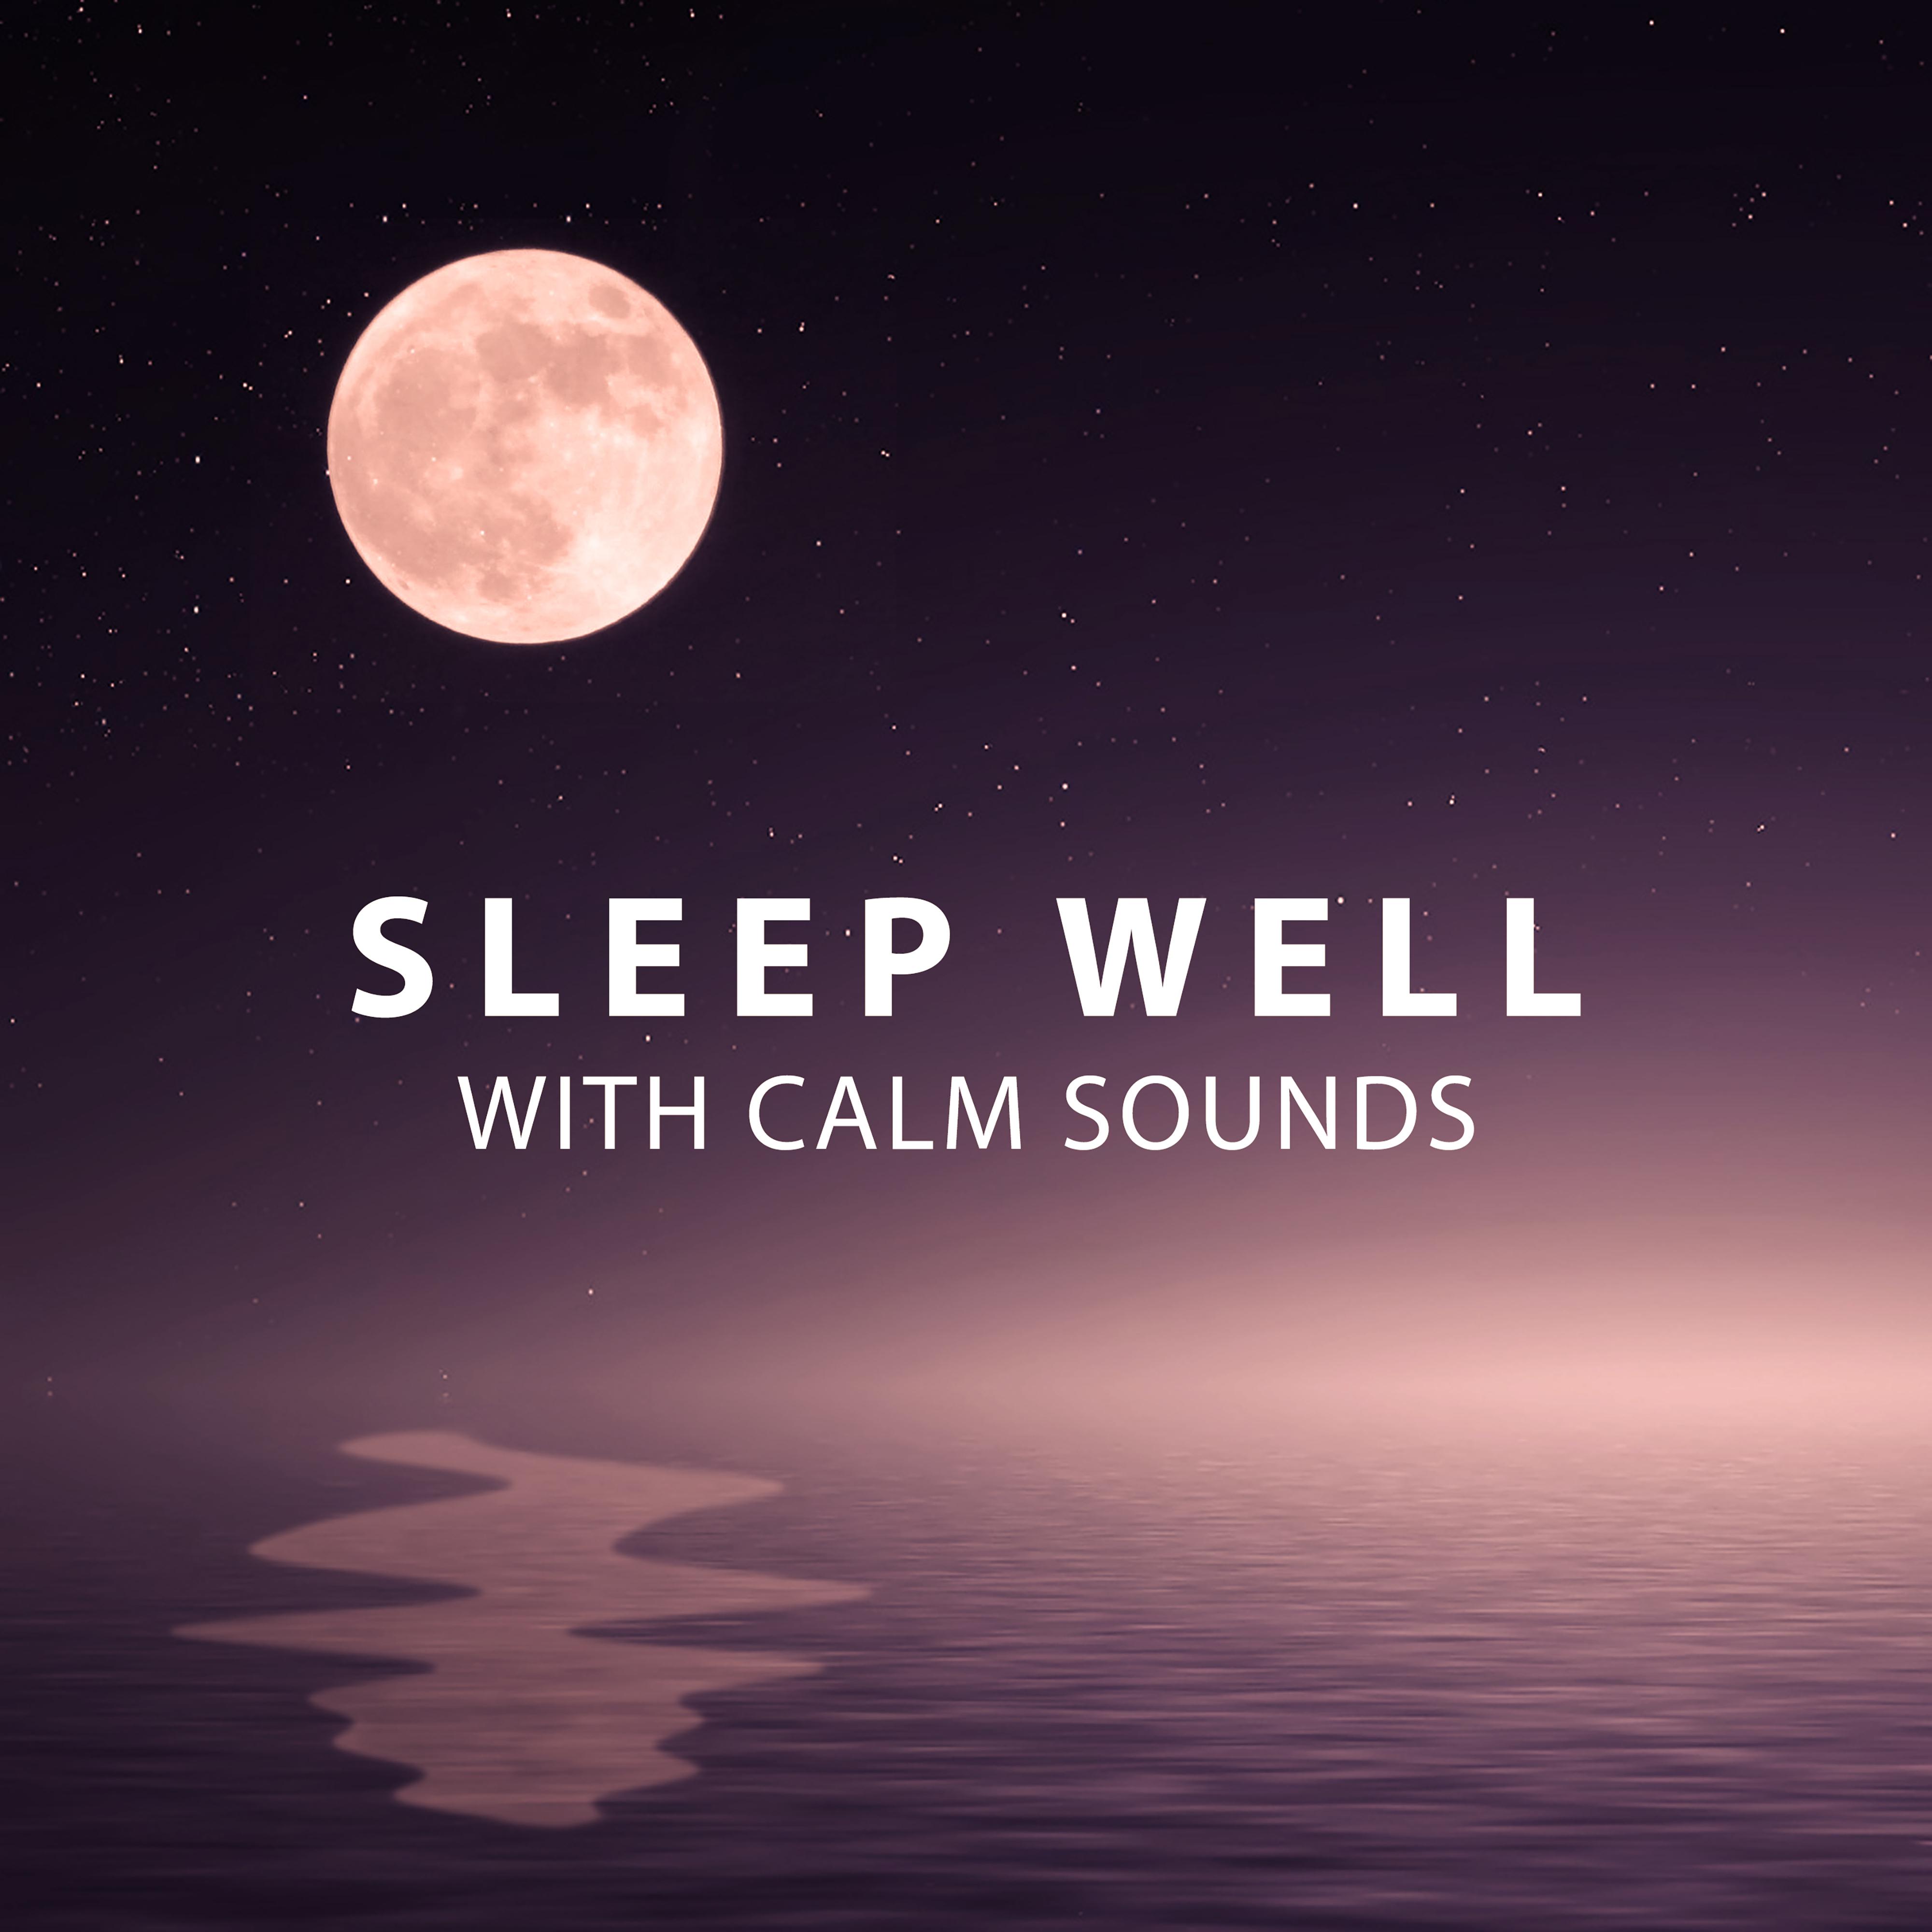 Sleep Well with Calm Sounds – Calming Sounds for Long Dreaming, Sleep All Night, Sweet Dreams, New Age Relaxation